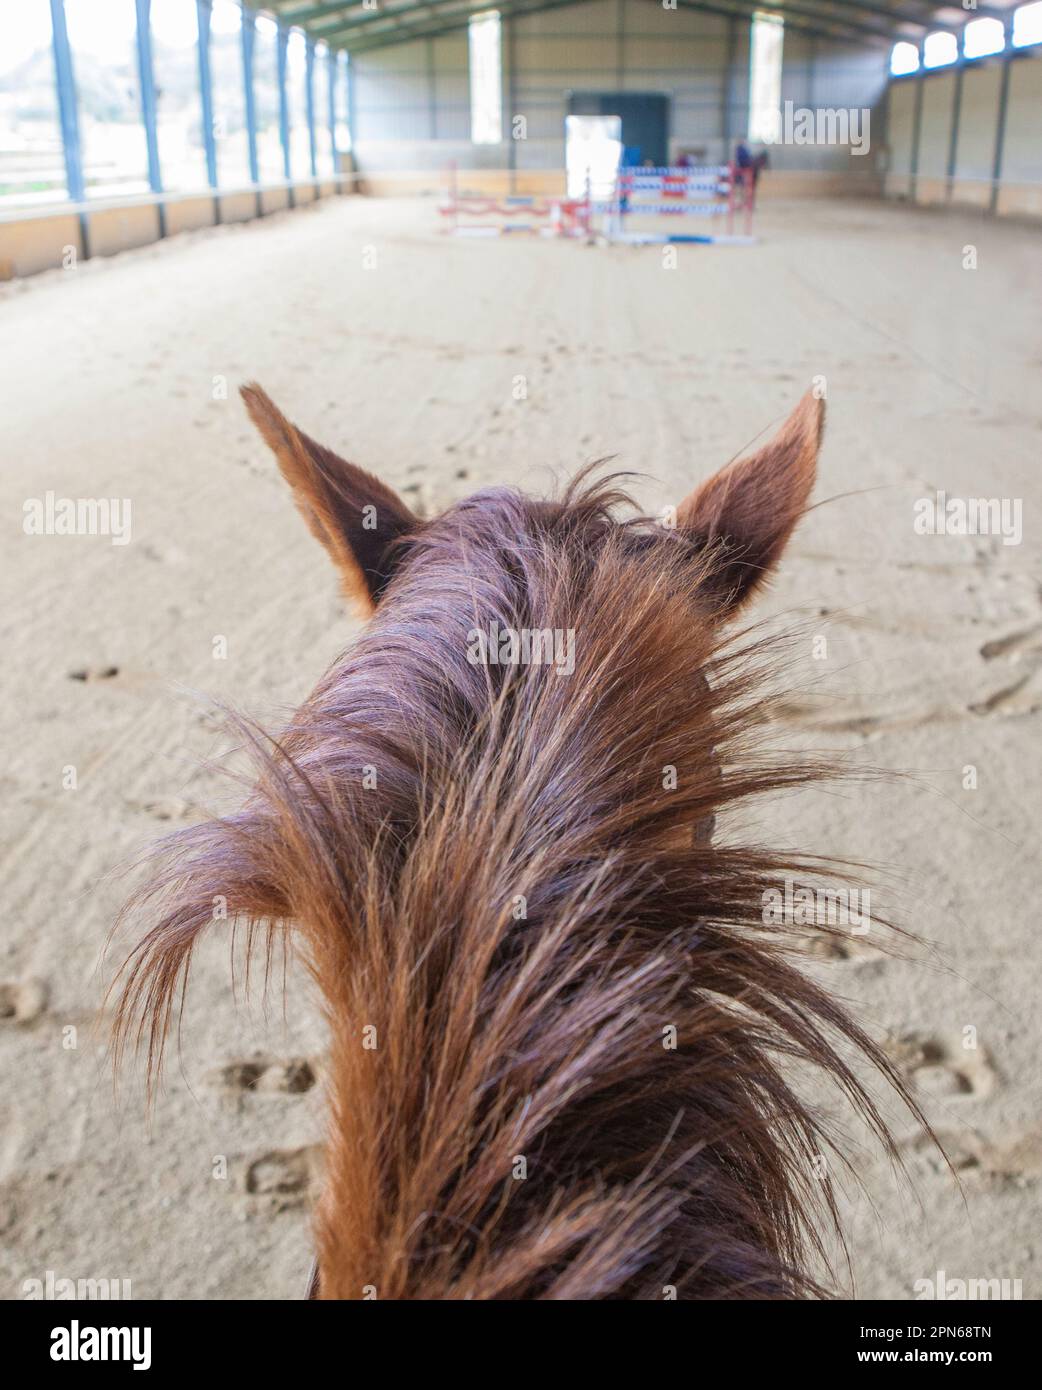 Horse training at indoor obstacles course. Scene viewed from horseback Stock Photo